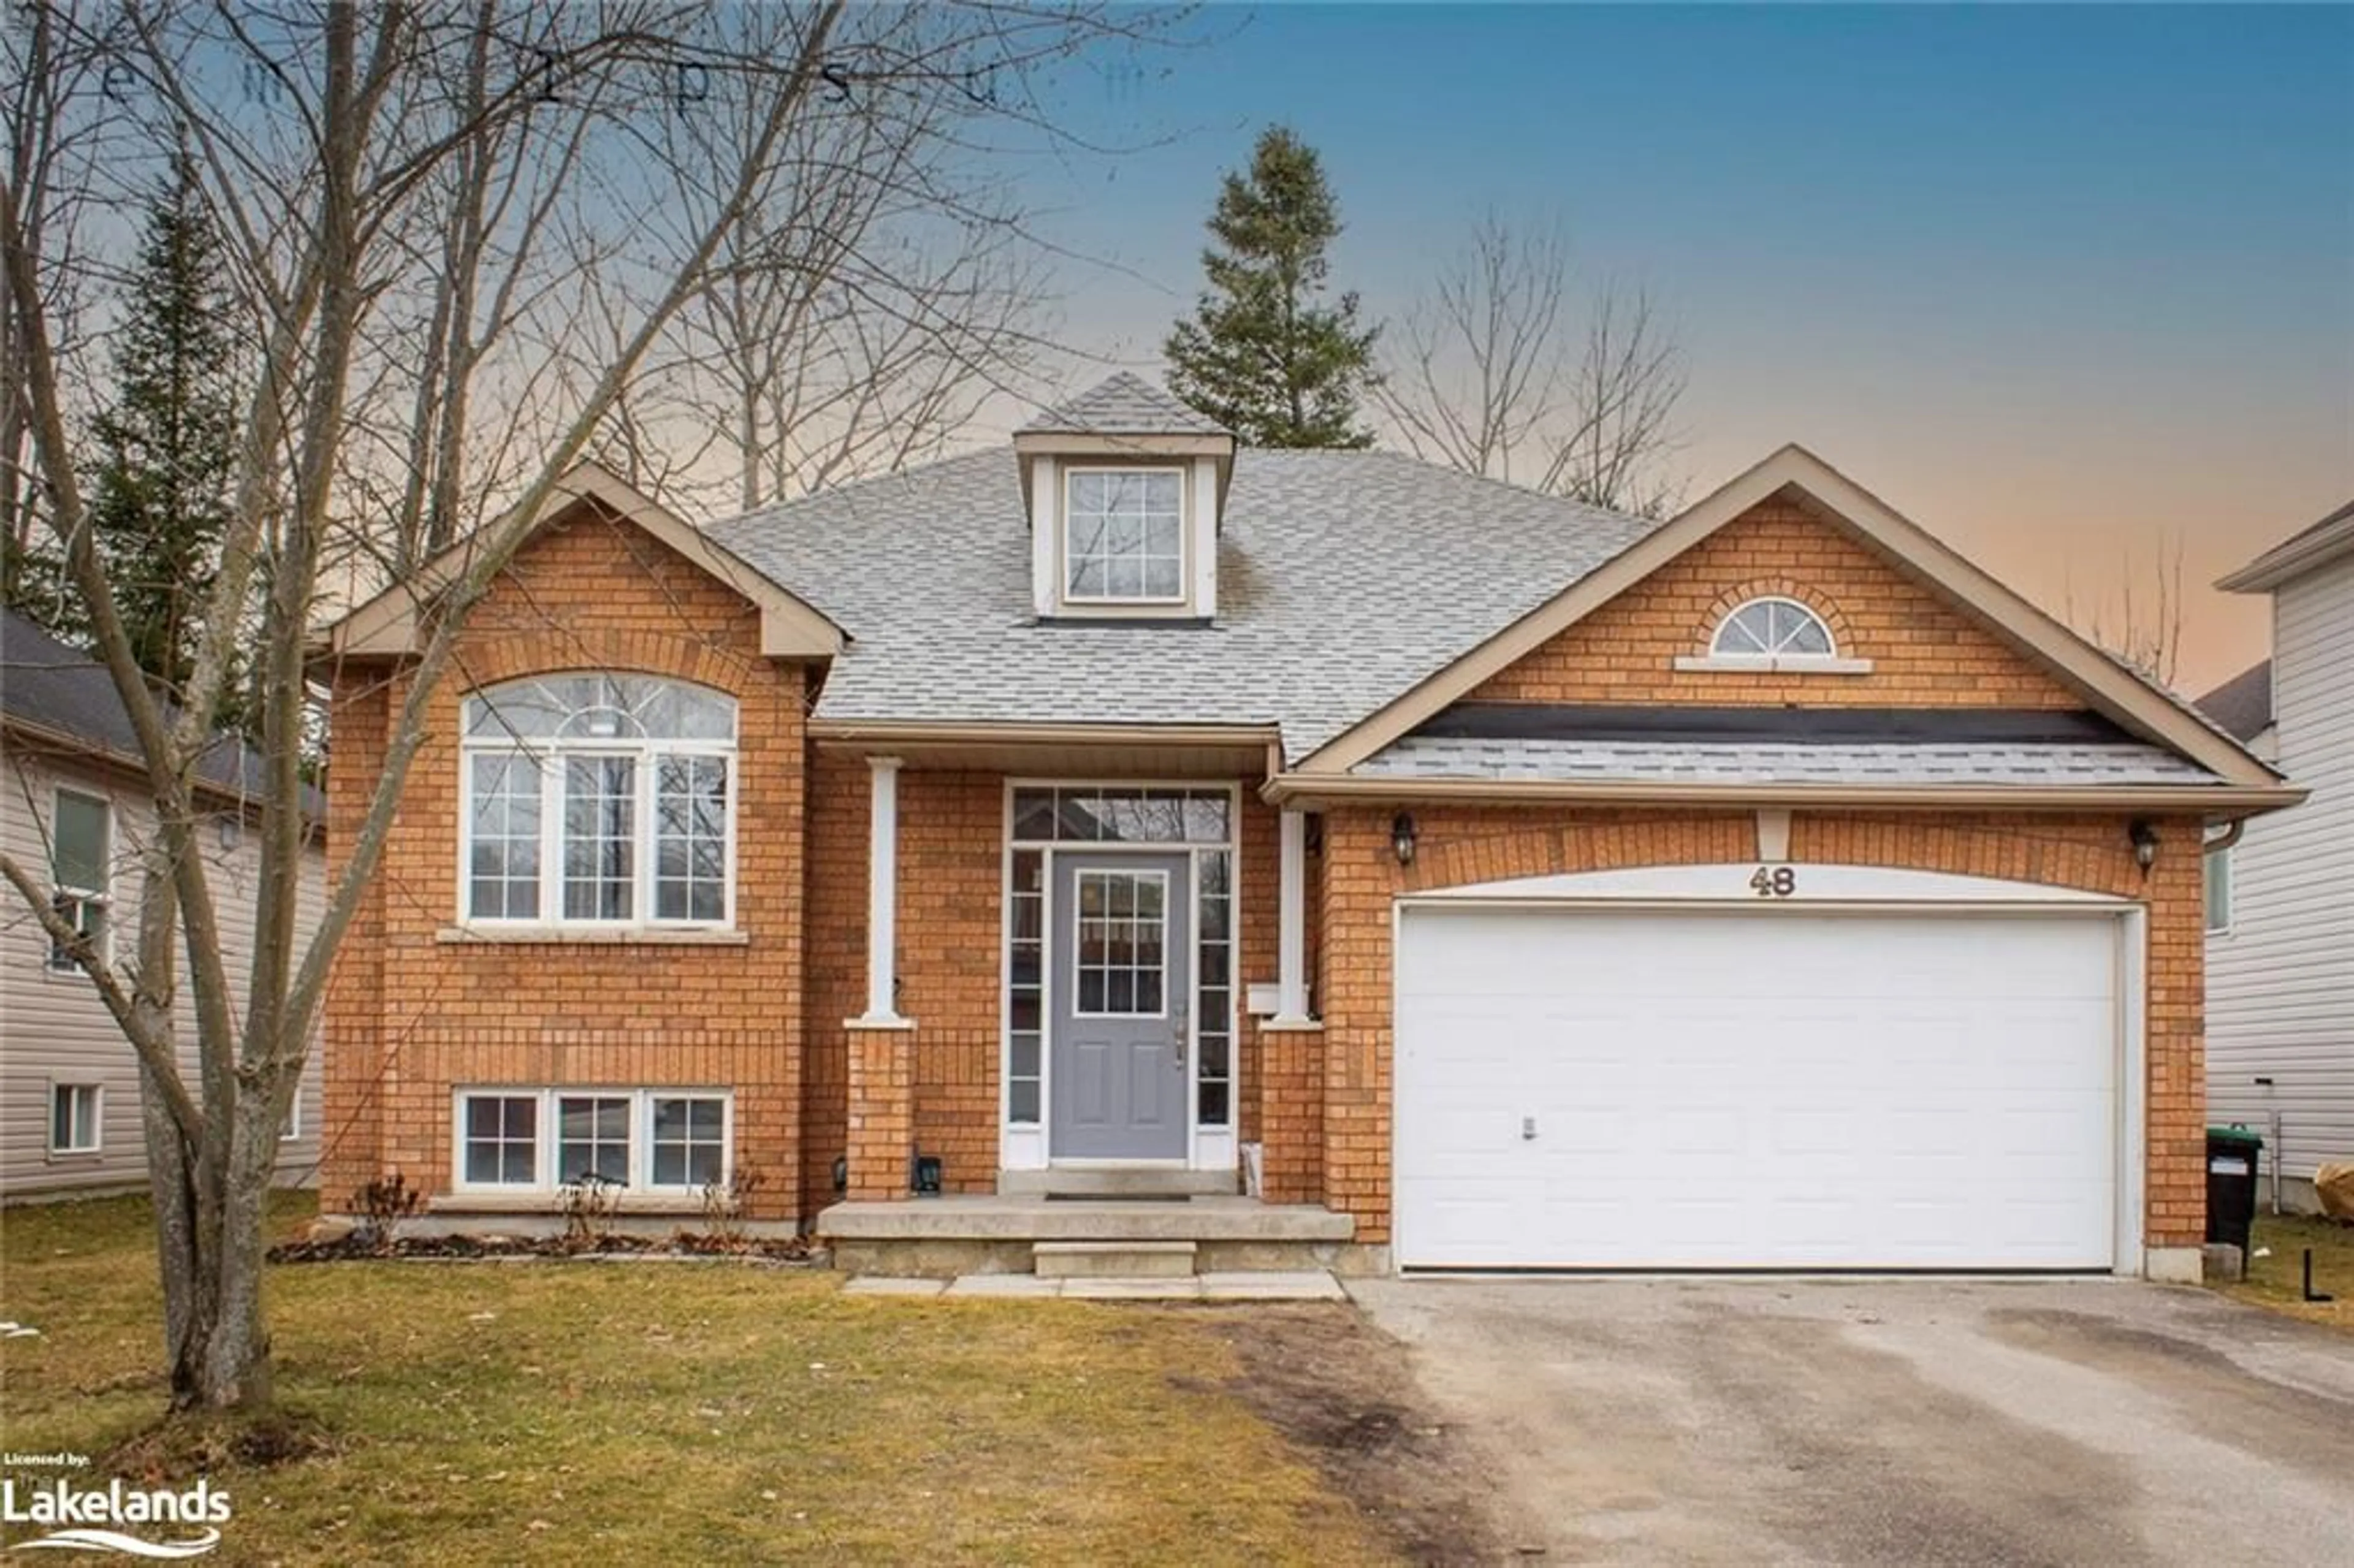 Home with brick exterior material for 48 Rose Valley Way, Wasaga Beach Ontario L9Z 3C4